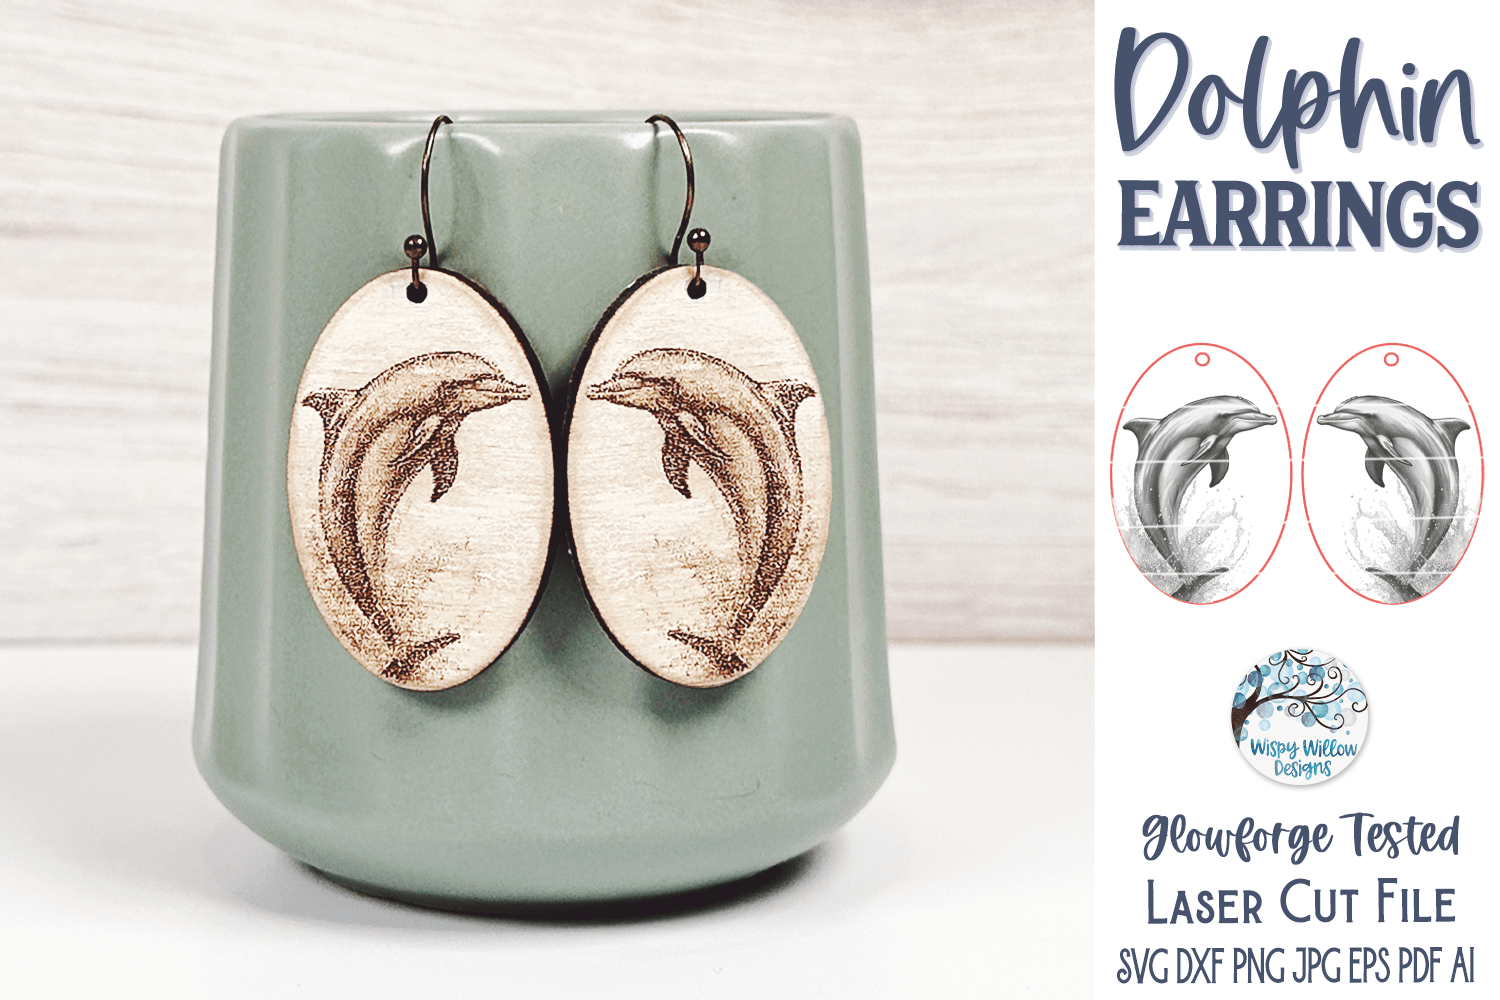 Dolphin Earring File for Glowforge or Laser Cutter Wispy Willow Designs Company